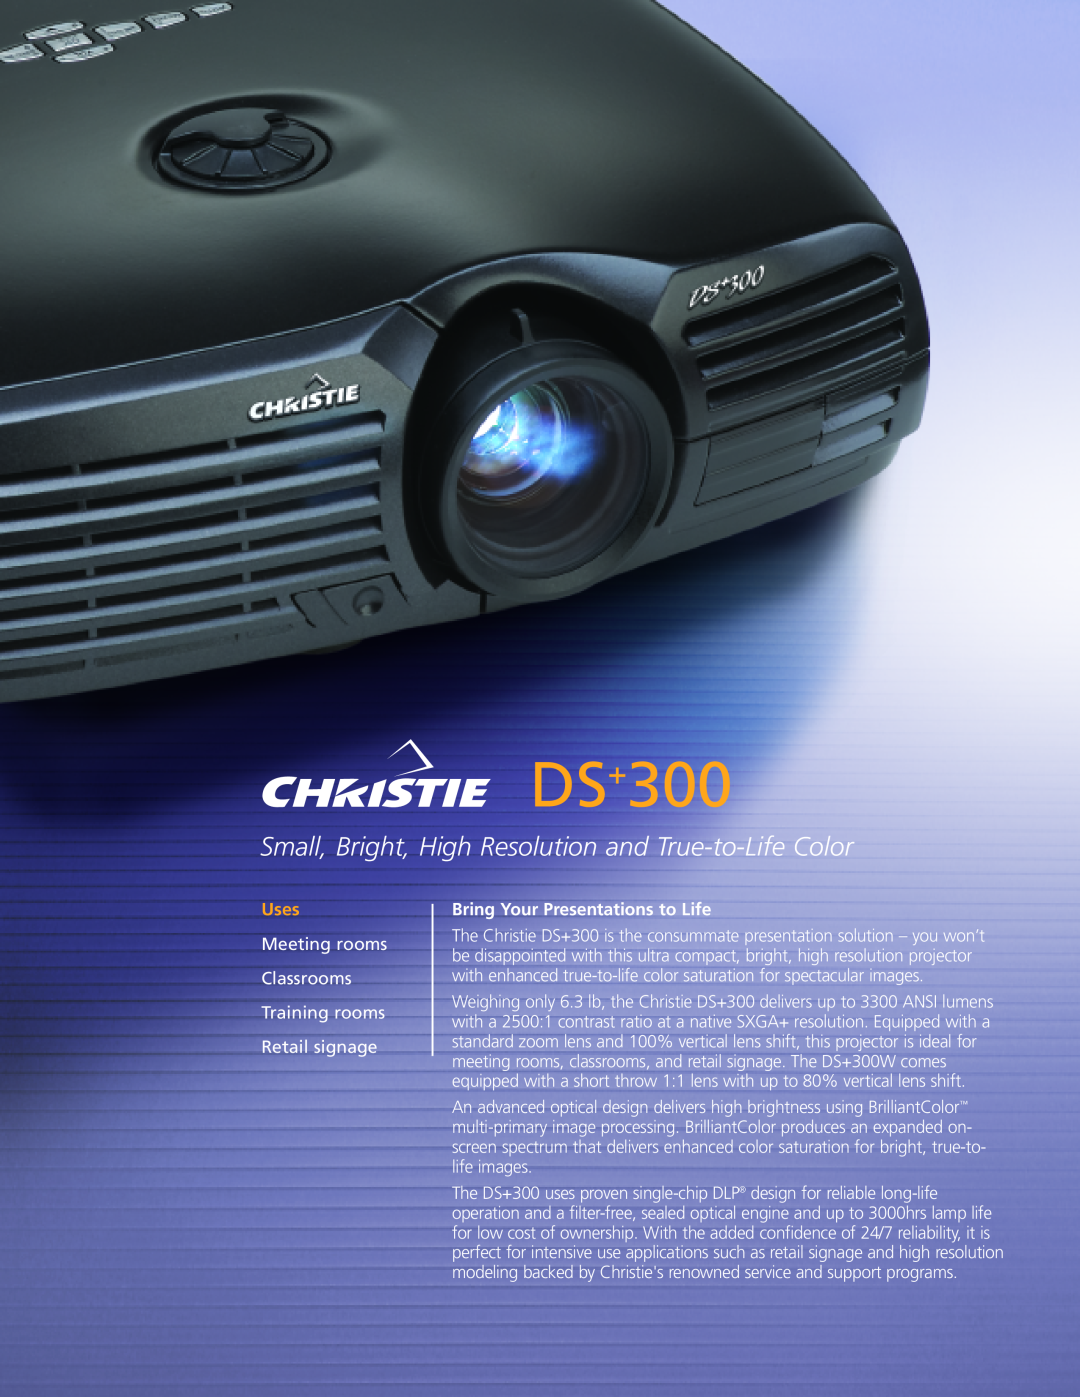 Christie Digital Systems DS+300 manual Small, Bright, High Resolution and True-to-Life Color, Uses 